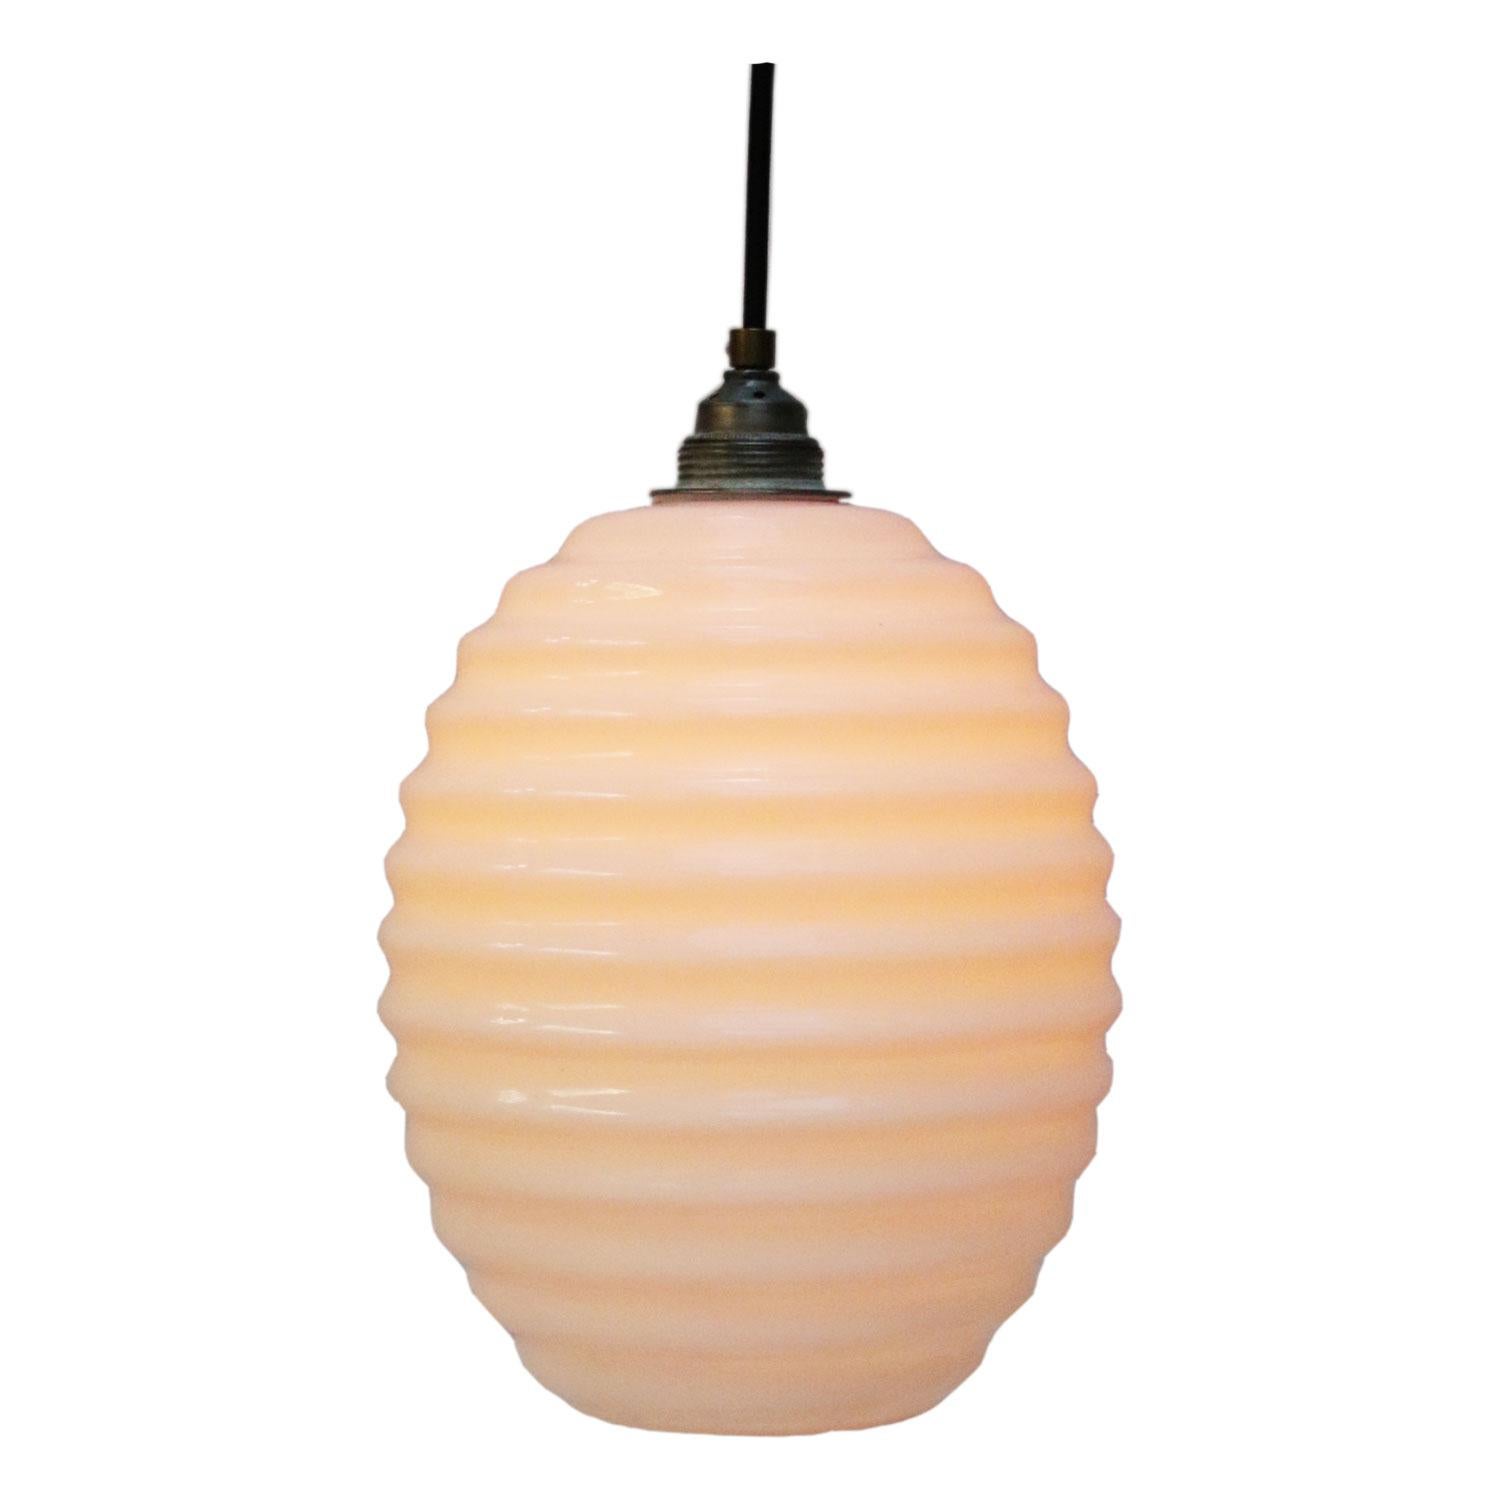 Opaline glass industrial Bauhaus pendant. 

Weight 1.0 kg / 2.2 lb

Priced per individual item. All lamps have been made suitable by international standards for incandescent light bulbs, energy-efficient and LED bulbs. E26/E27 bulb holders and